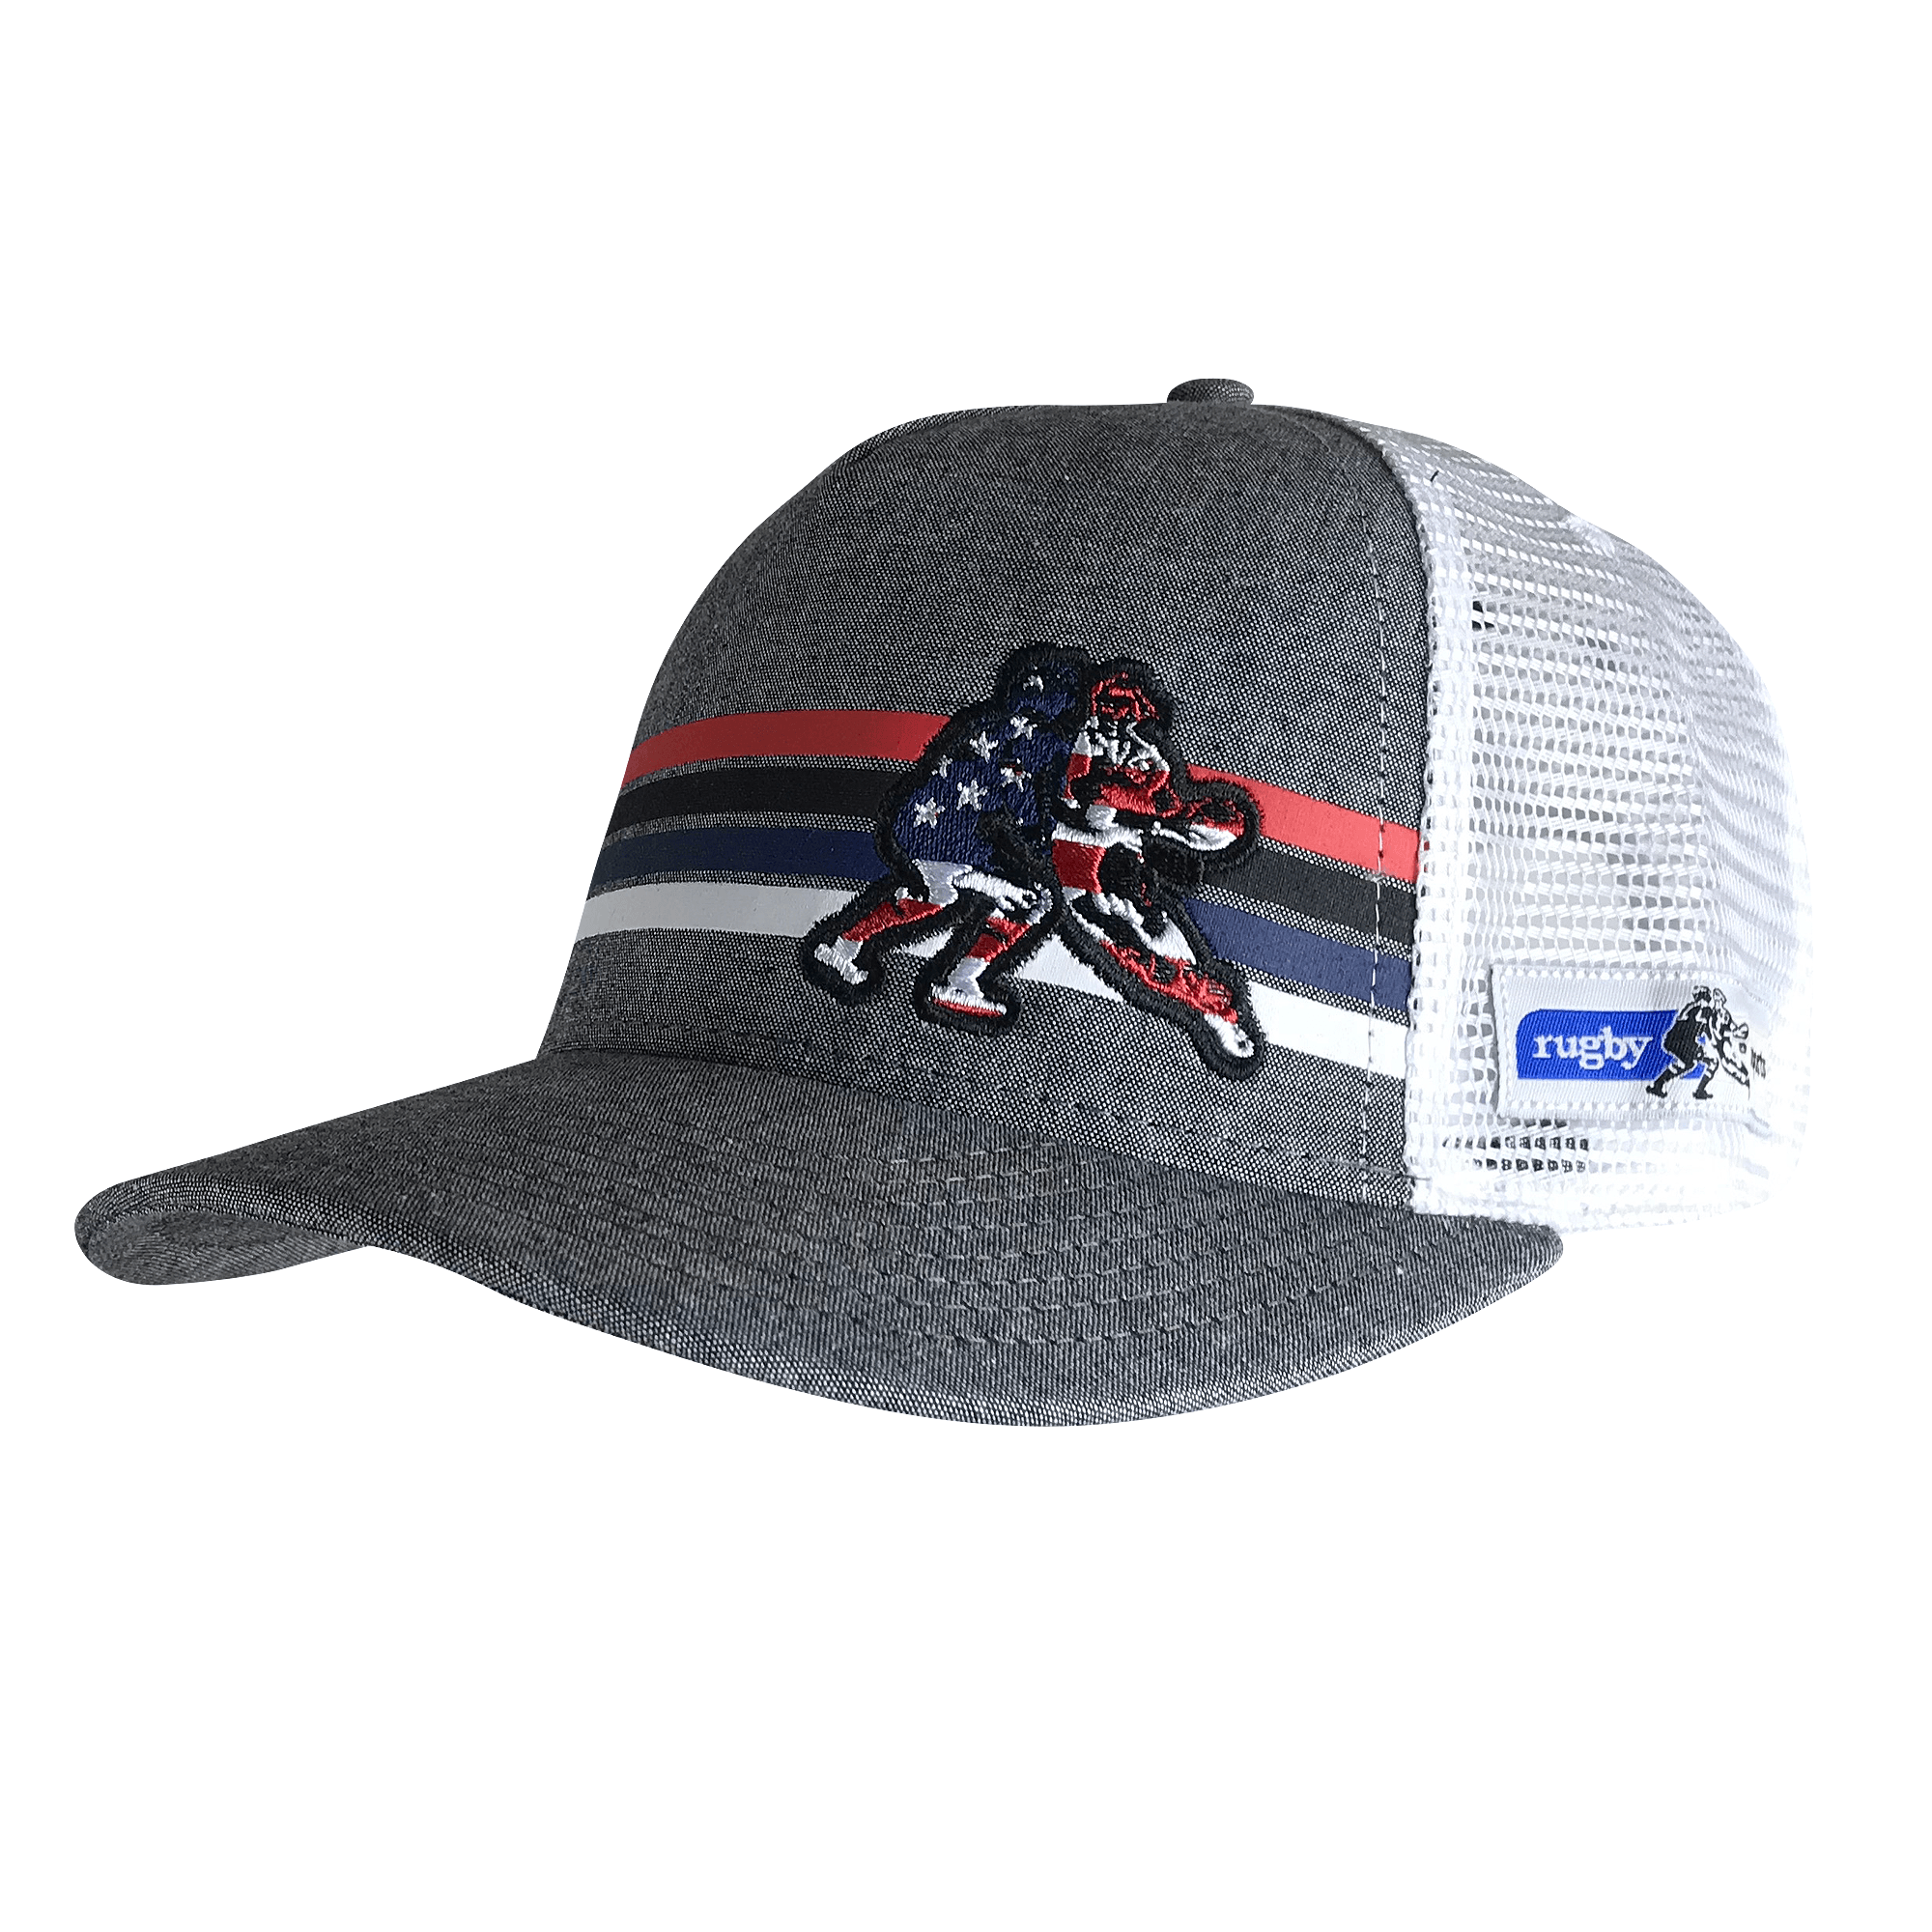 Rugby Imports Rugby Imports USA Stripe Trucker Hat